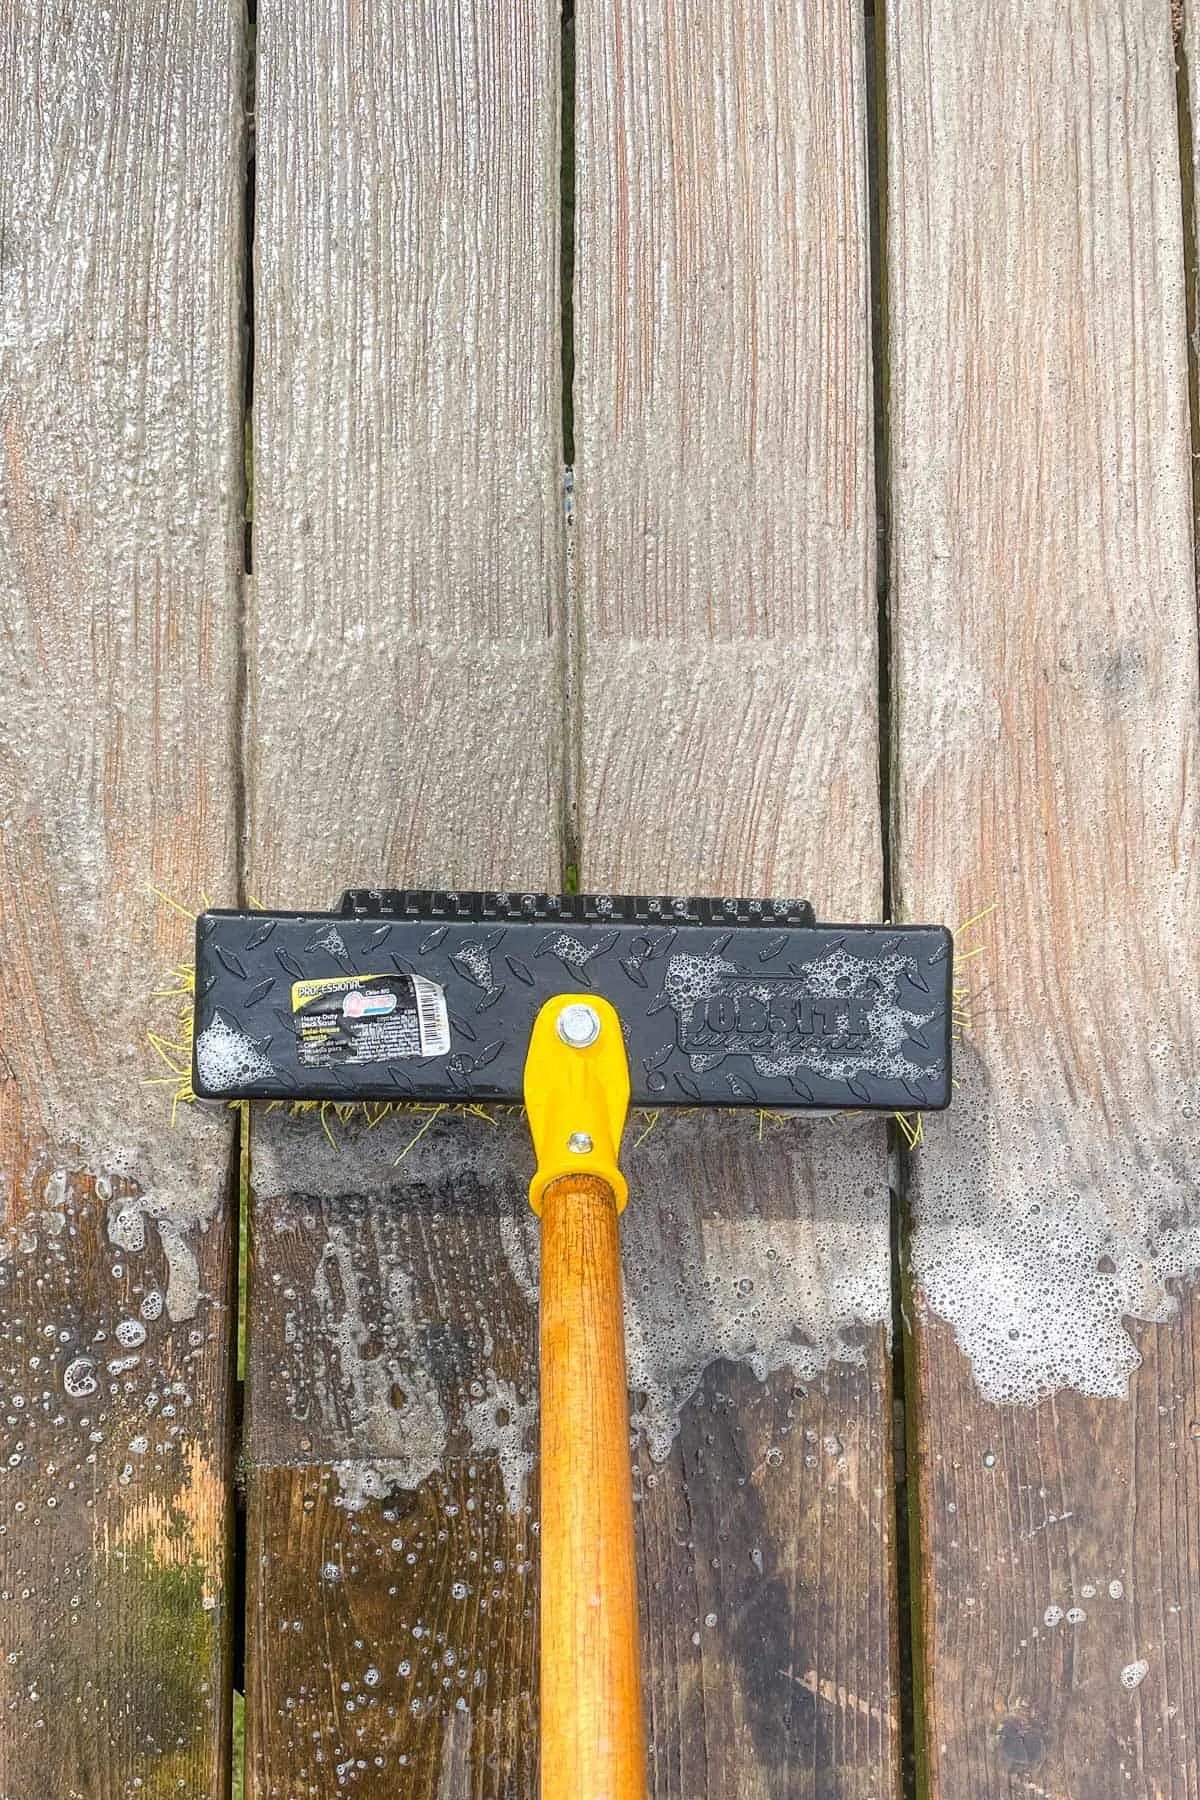 cleaning the surface of a deck with deck cleaner and a scrub brush